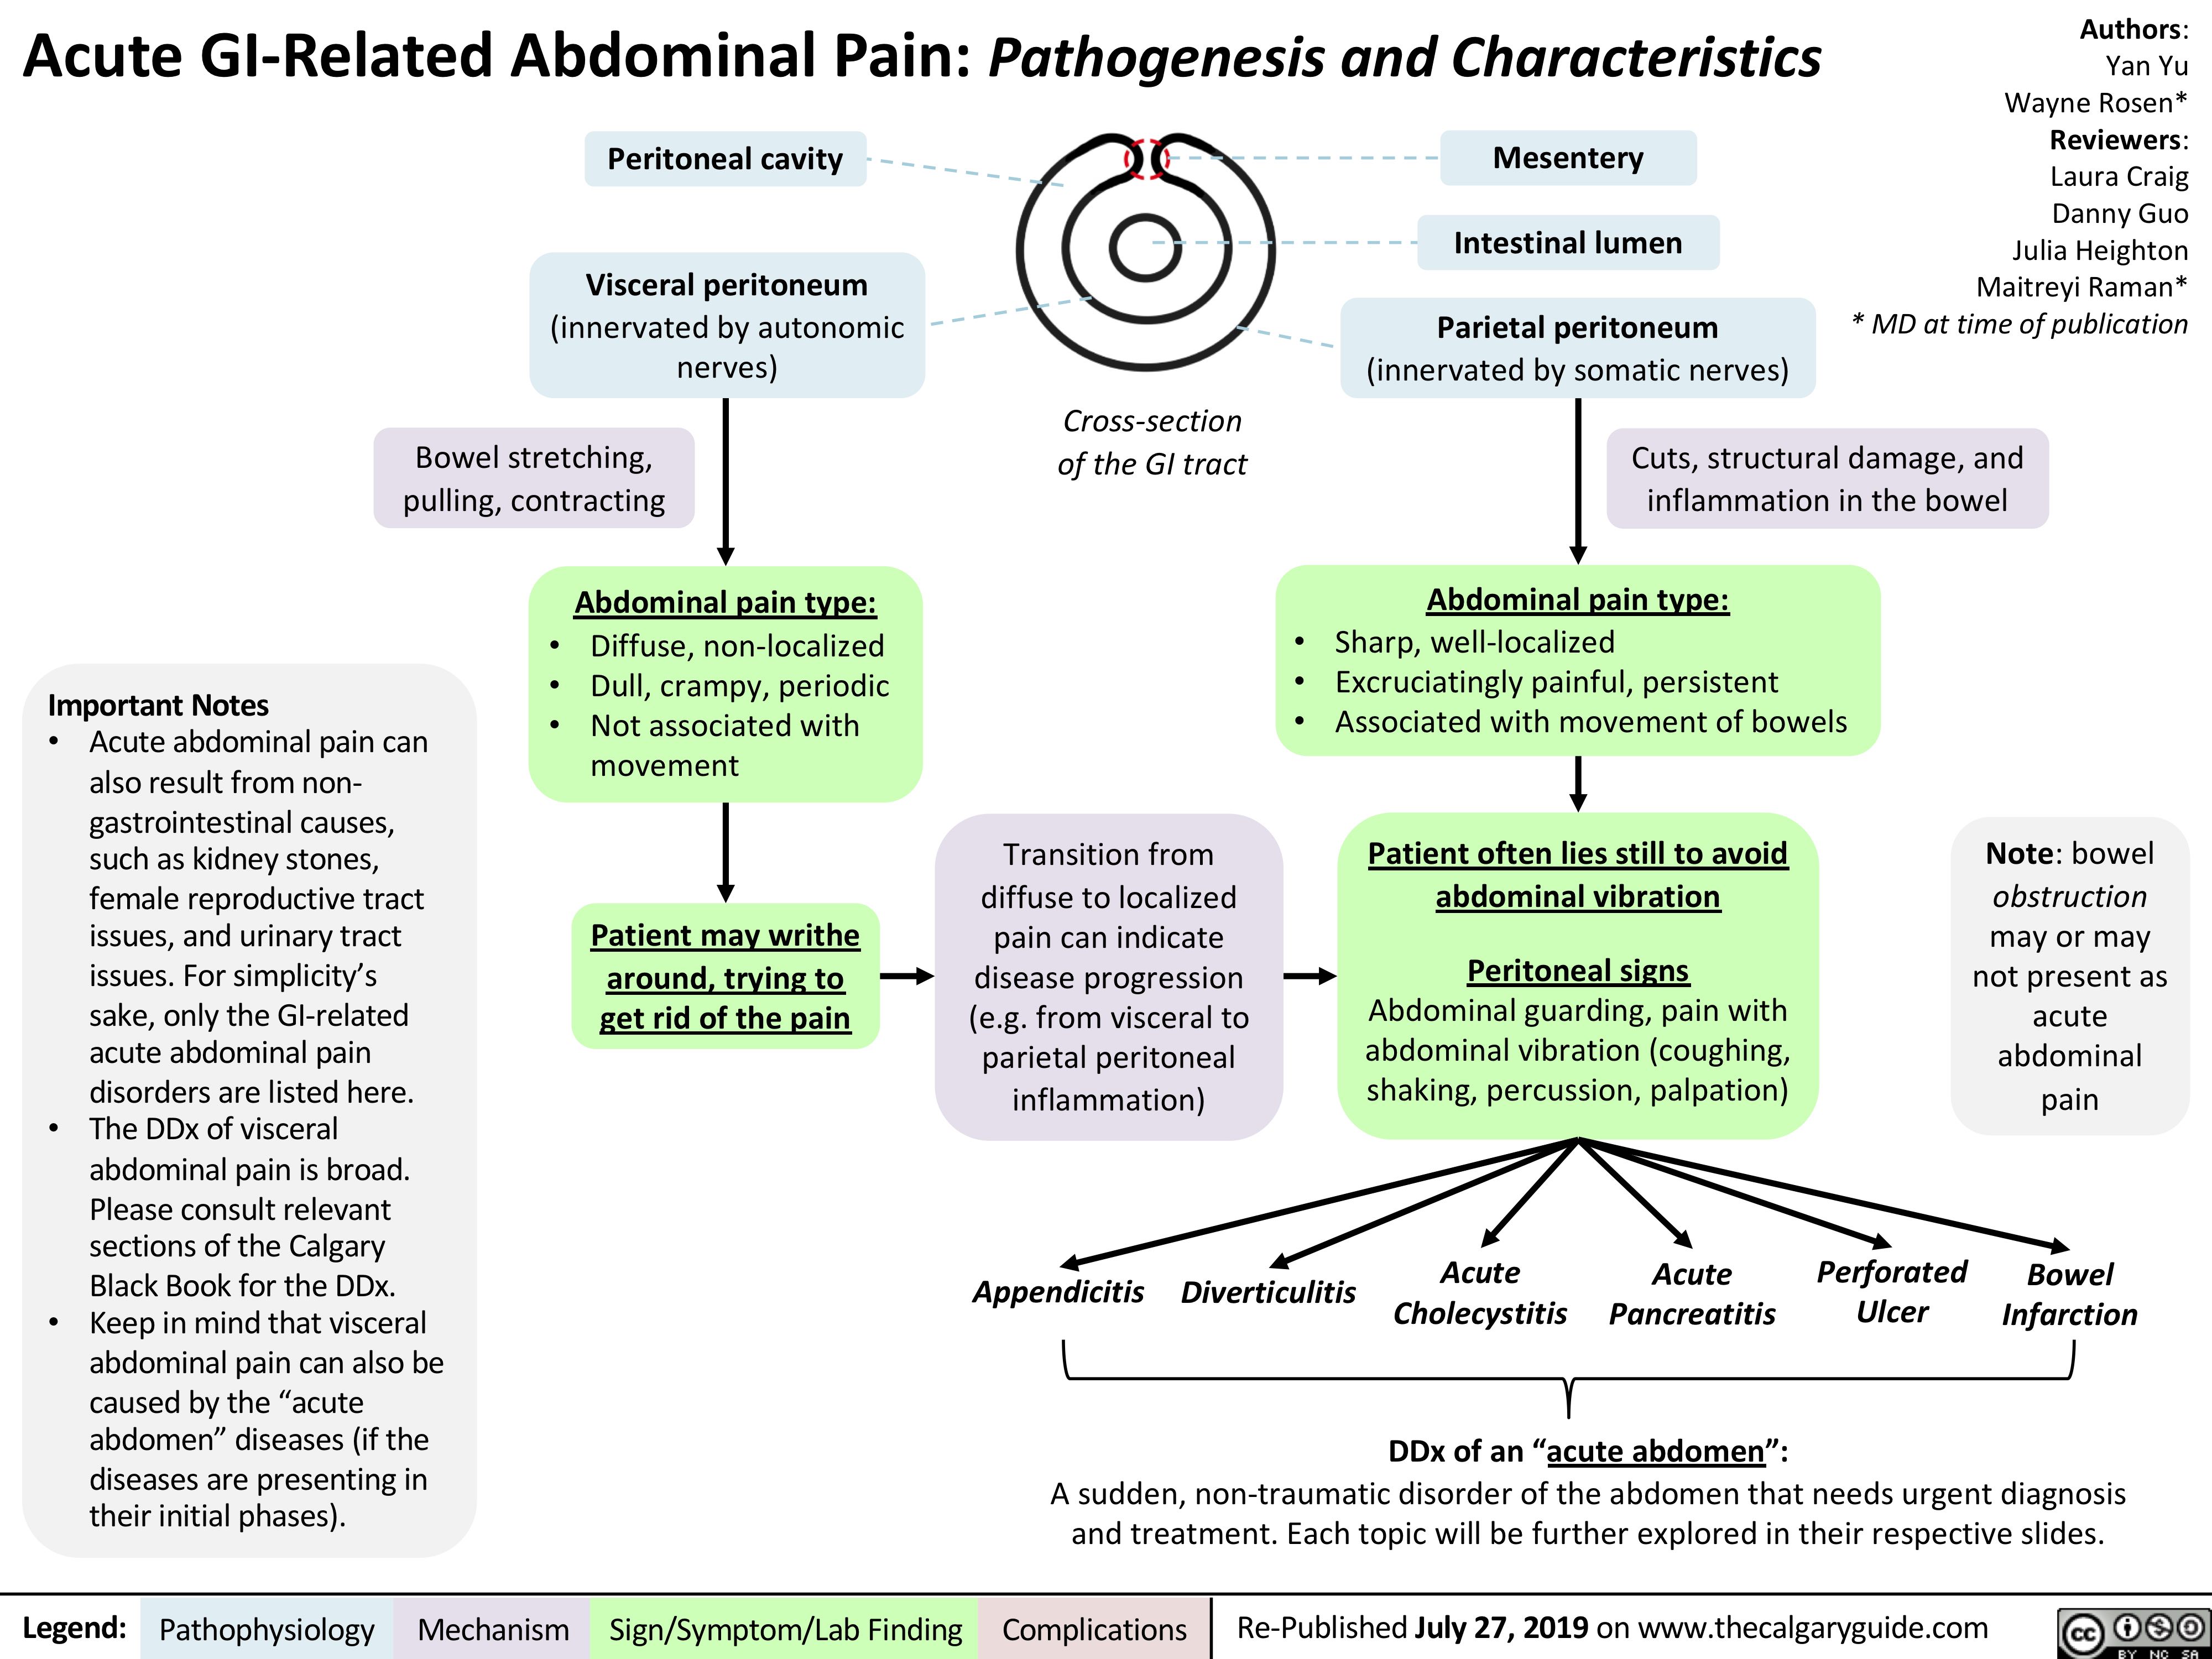 Acute GI-Related Abdominal Pain: Pathogenesis and Characteristics
Authors: Yan Yu Wayne Rosen* Reviewers: Laura Craig Danny Guo Julia Heighton Maitreyi Raman* * MD at time of publication
   Peritoneal cavity
Visceral peritoneum
(innervated by autonomic nerves)
Bowel stretching, pulling, contracting
Abdominal pain type:
Diffuse, non-localized Dull, crampy, periodic Not associated with movement
Patient may writhe around, trying to get rid of the pain
Mesentery Intestinal lumen
Parietal peritoneum
(innervated by somatic nerves)
          Cross-section of the GI tract
Cuts, structural damage, and inflammation in the bowel
       Important Notes
• Acute abdominal pain can also result from non-
gastrointestinal causes, such as kidney stones, female reproductive tract issues, and urinary tract issues. For simplicity’s sake, only the GI-related acute abdominal pain disorders are listed here.
• The DDx of visceral abdominal pain is broad. Please consult relevant sections of the Calgary Black Book for the DDx.
• Keep in mind that visceral abdominal pain can also be caused by the “acute abdomen” diseases (if the diseases are presenting in their initial phases).
• • •
• • •
Abdominal pain type:
Sharp, well-localized
Excruciatingly painful, persistent Associated with movement of bowels
Patient often lies still to avoid abdominal vibration
Peritoneal signs
Abdominal guarding, pain with abdominal vibration (coughing, shaking, percussion, palpation)
     Transition from diffuse to localized pain can indicate disease progression (e.g. from visceral to parietal peritoneal inflammation)
Note: bowel obstruction may or may not present as acute abdominal pain
Bowel Infarction
       Appendicitis Diverticulitis
Acute Cholecystitis
Acute Pancreatitis
Perforated Ulcer
 DDx of an “acute abdomen”:
 A sudden, non-traumatic disorder of the abdomen that needs urgent diagnosis and treatment. Each topic will be further explored in their respective slides.
 Legend:
 Pathophysiology
 Mechanism
Sign/Symptom/Lab Finding
  Complications
Re-Published July 27, 2019 on www.thecalgaryguide.com
   